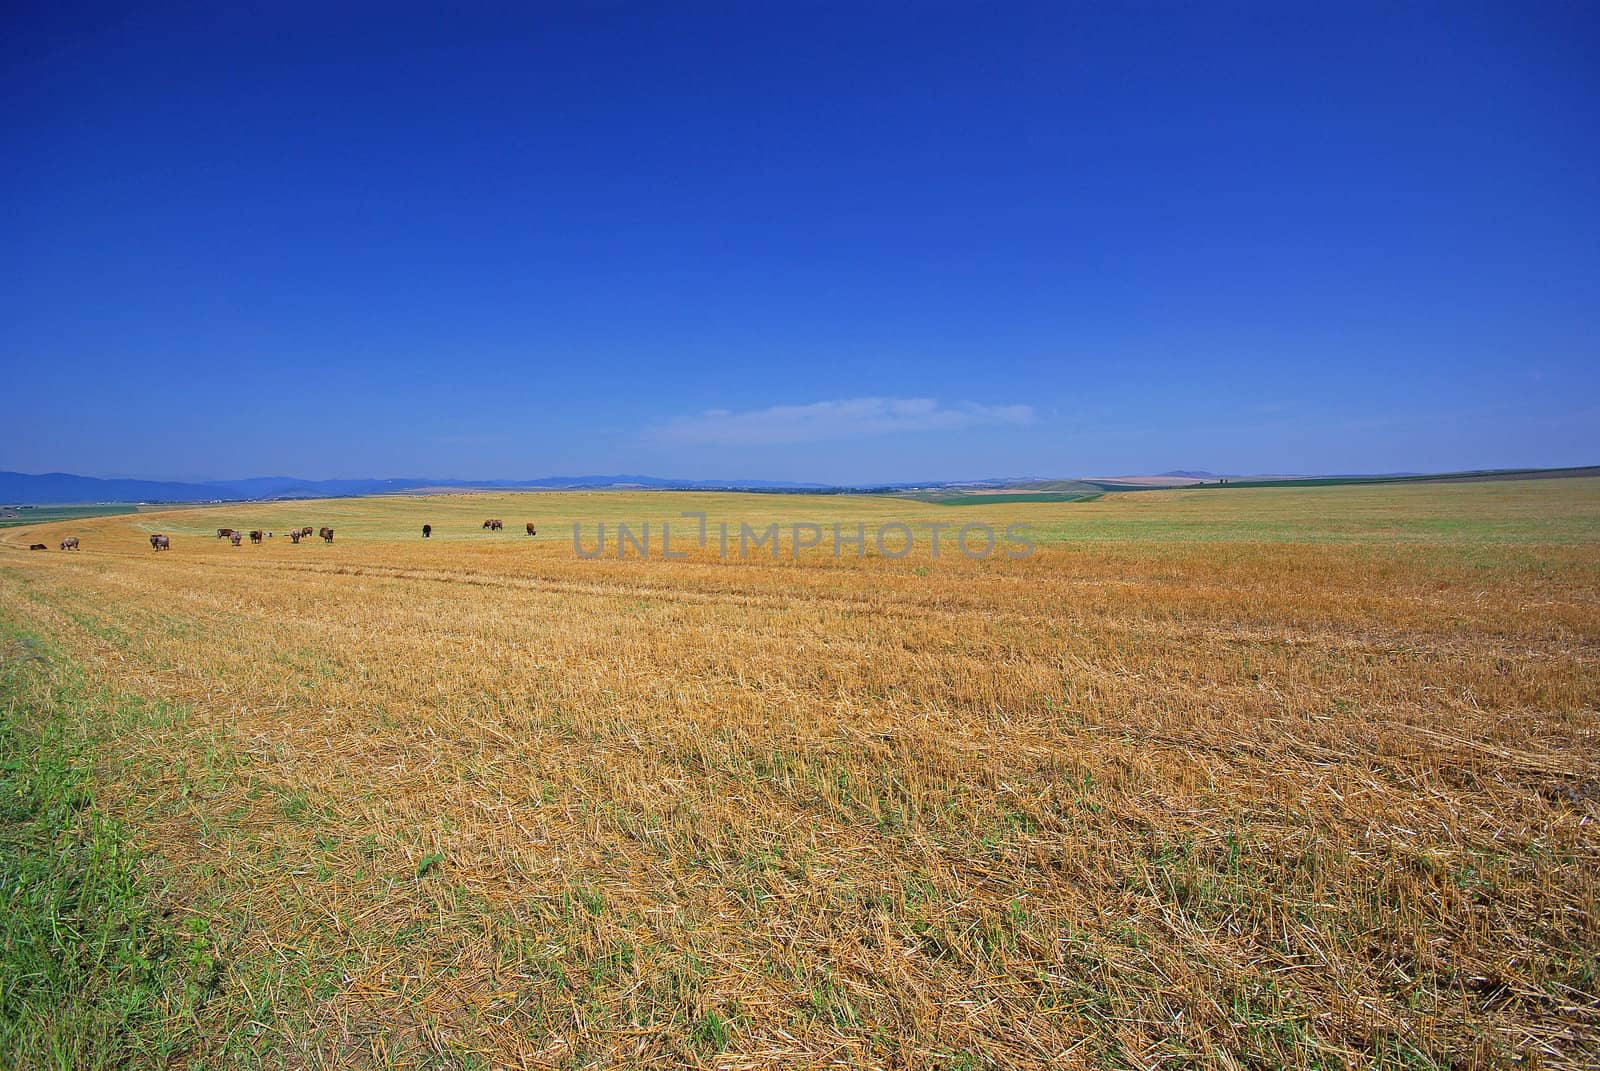 Wheat field after harvest by savcoco